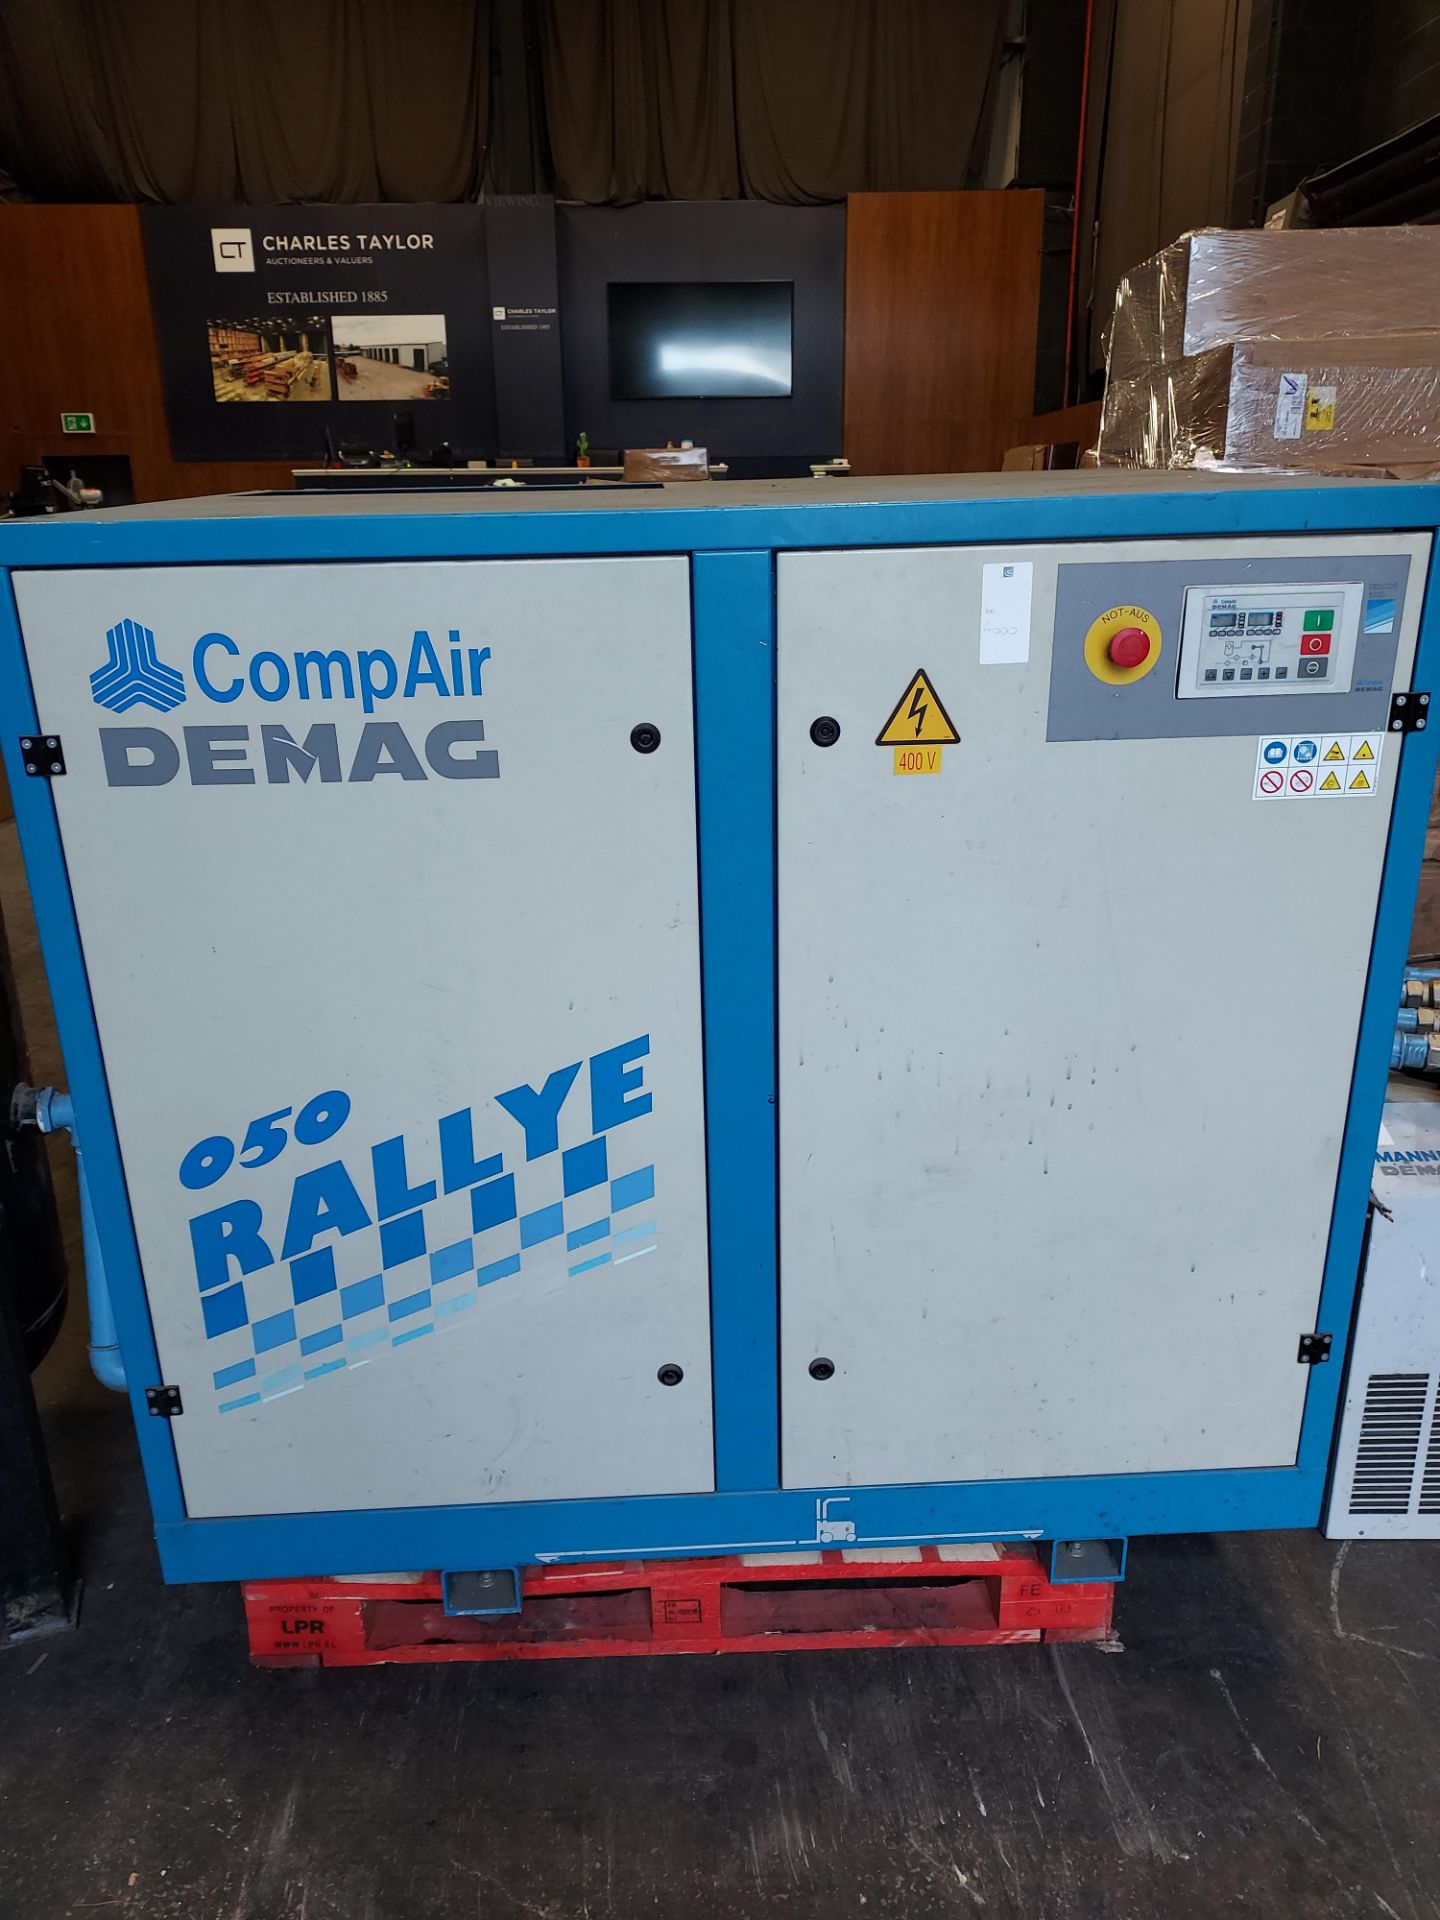 COMPRESSOR UNIT CONTAINING 3 STAND ALONE UNITS TO INC - -COMP AIR DEMAG 050 RALLYE (TYPE-RA-050) DOM - Image 3 of 4